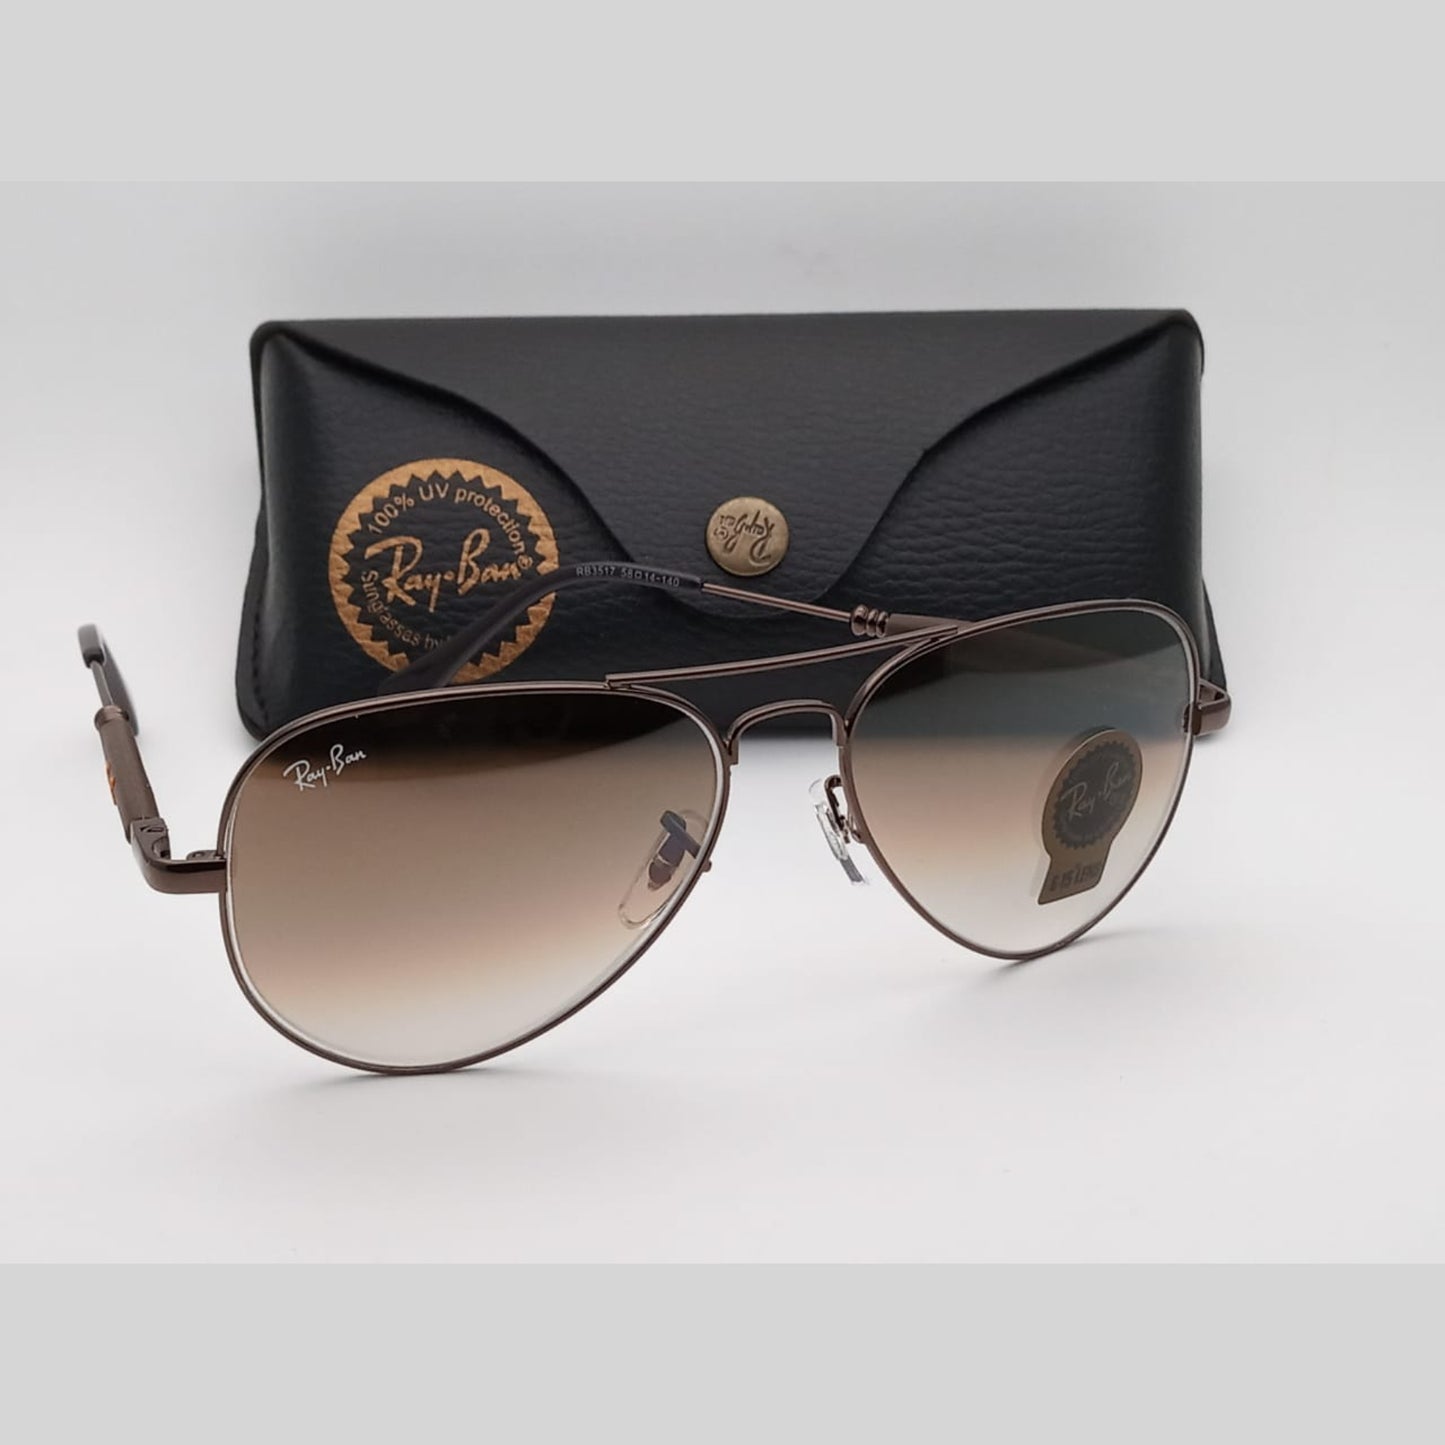 Brown Shaded & Brown 3517 Oval Trendy Hot Favourite Wintage Sunglass For Unisex.